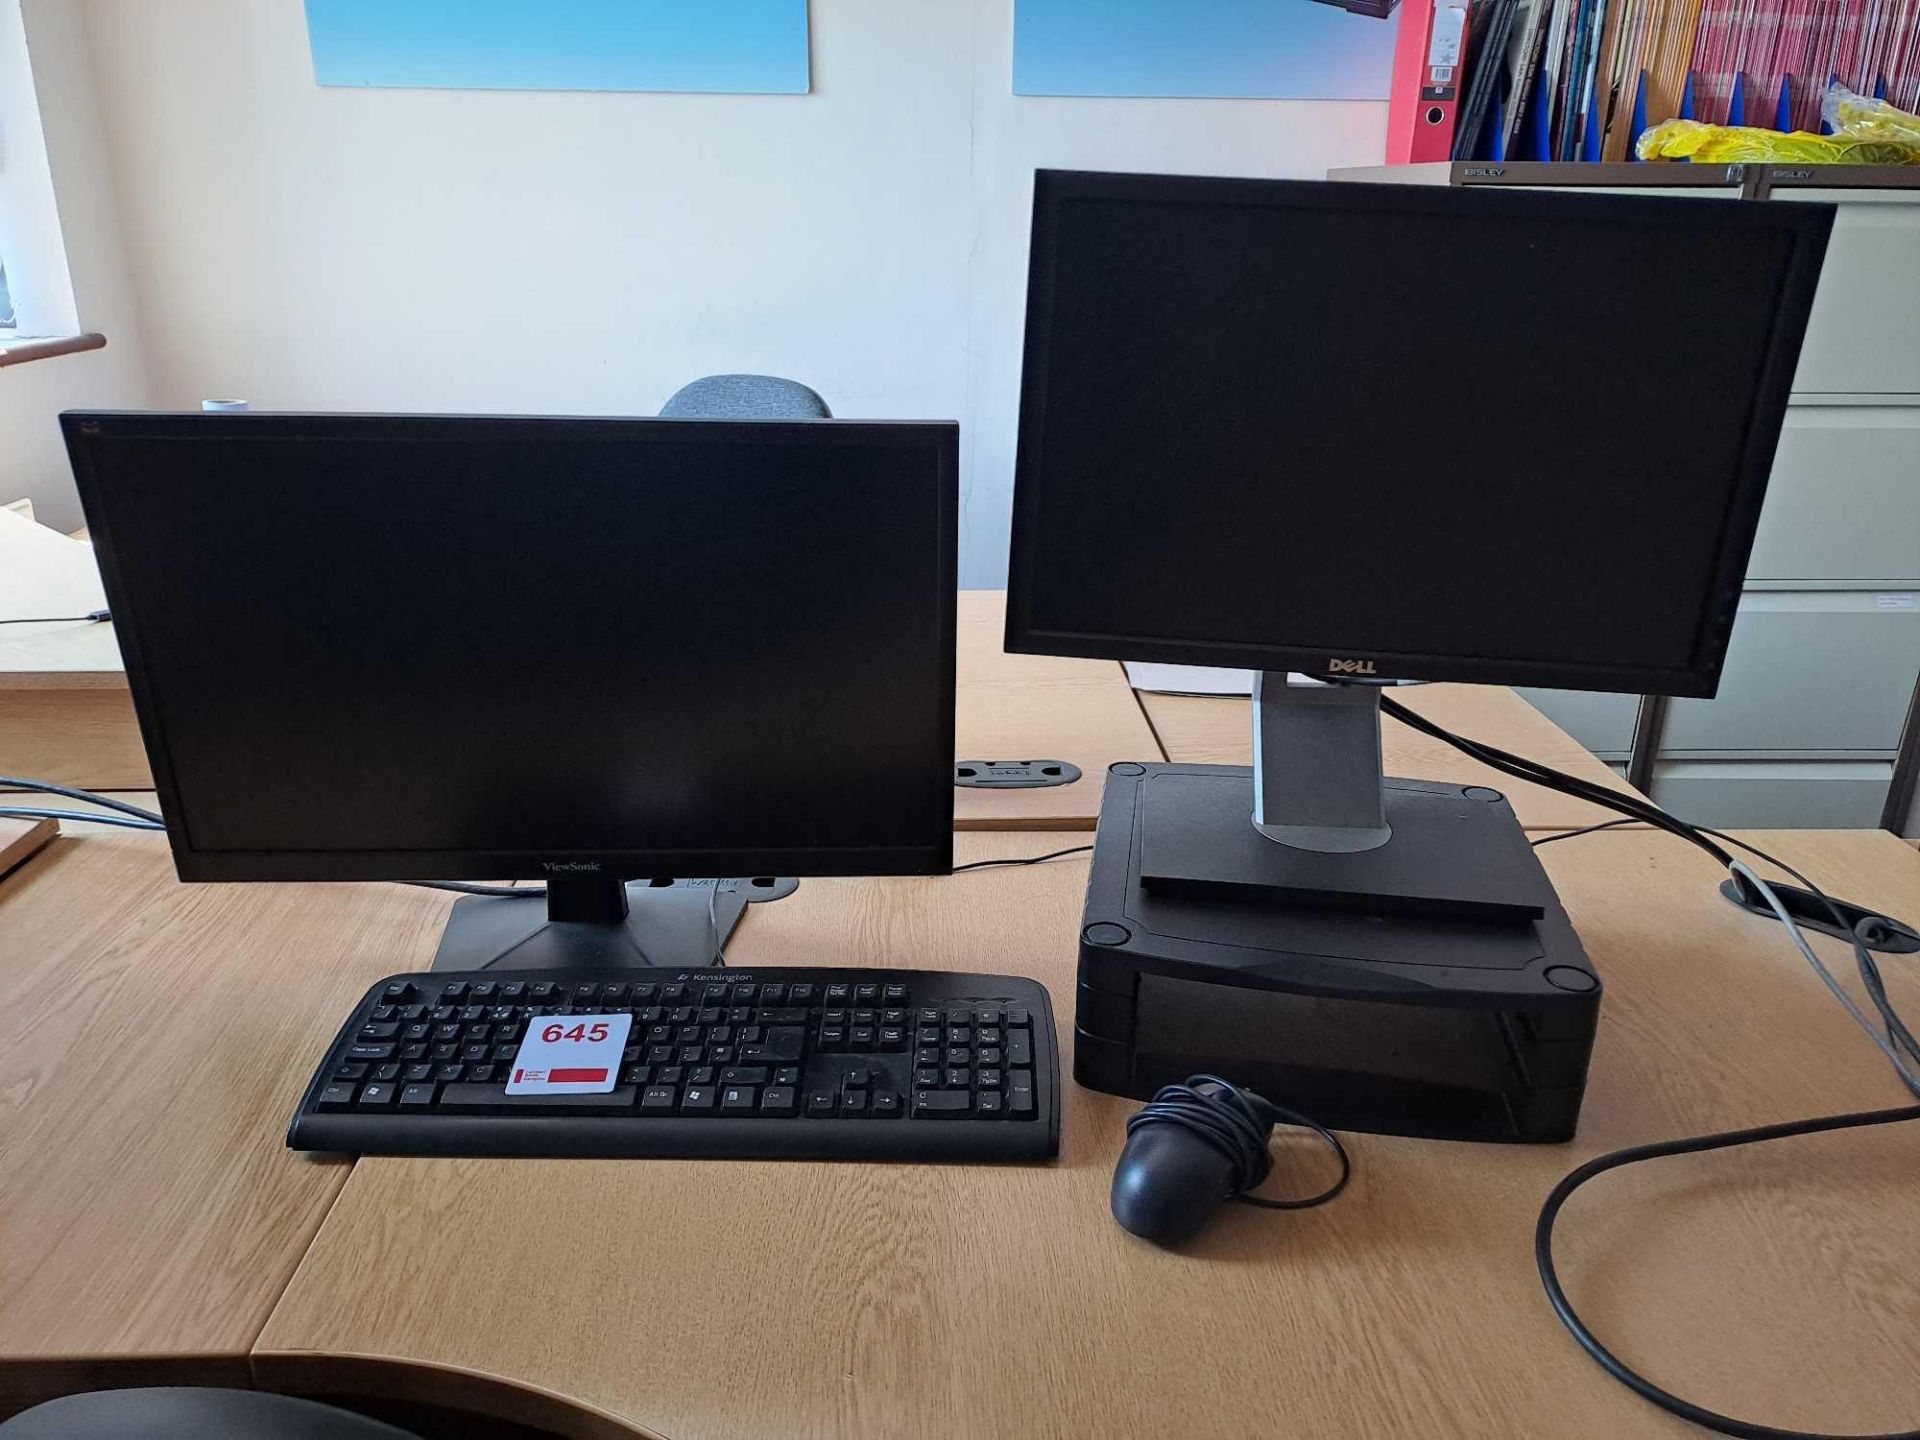 One Viewsonic & one Dell monitor, with keyboard & mouse